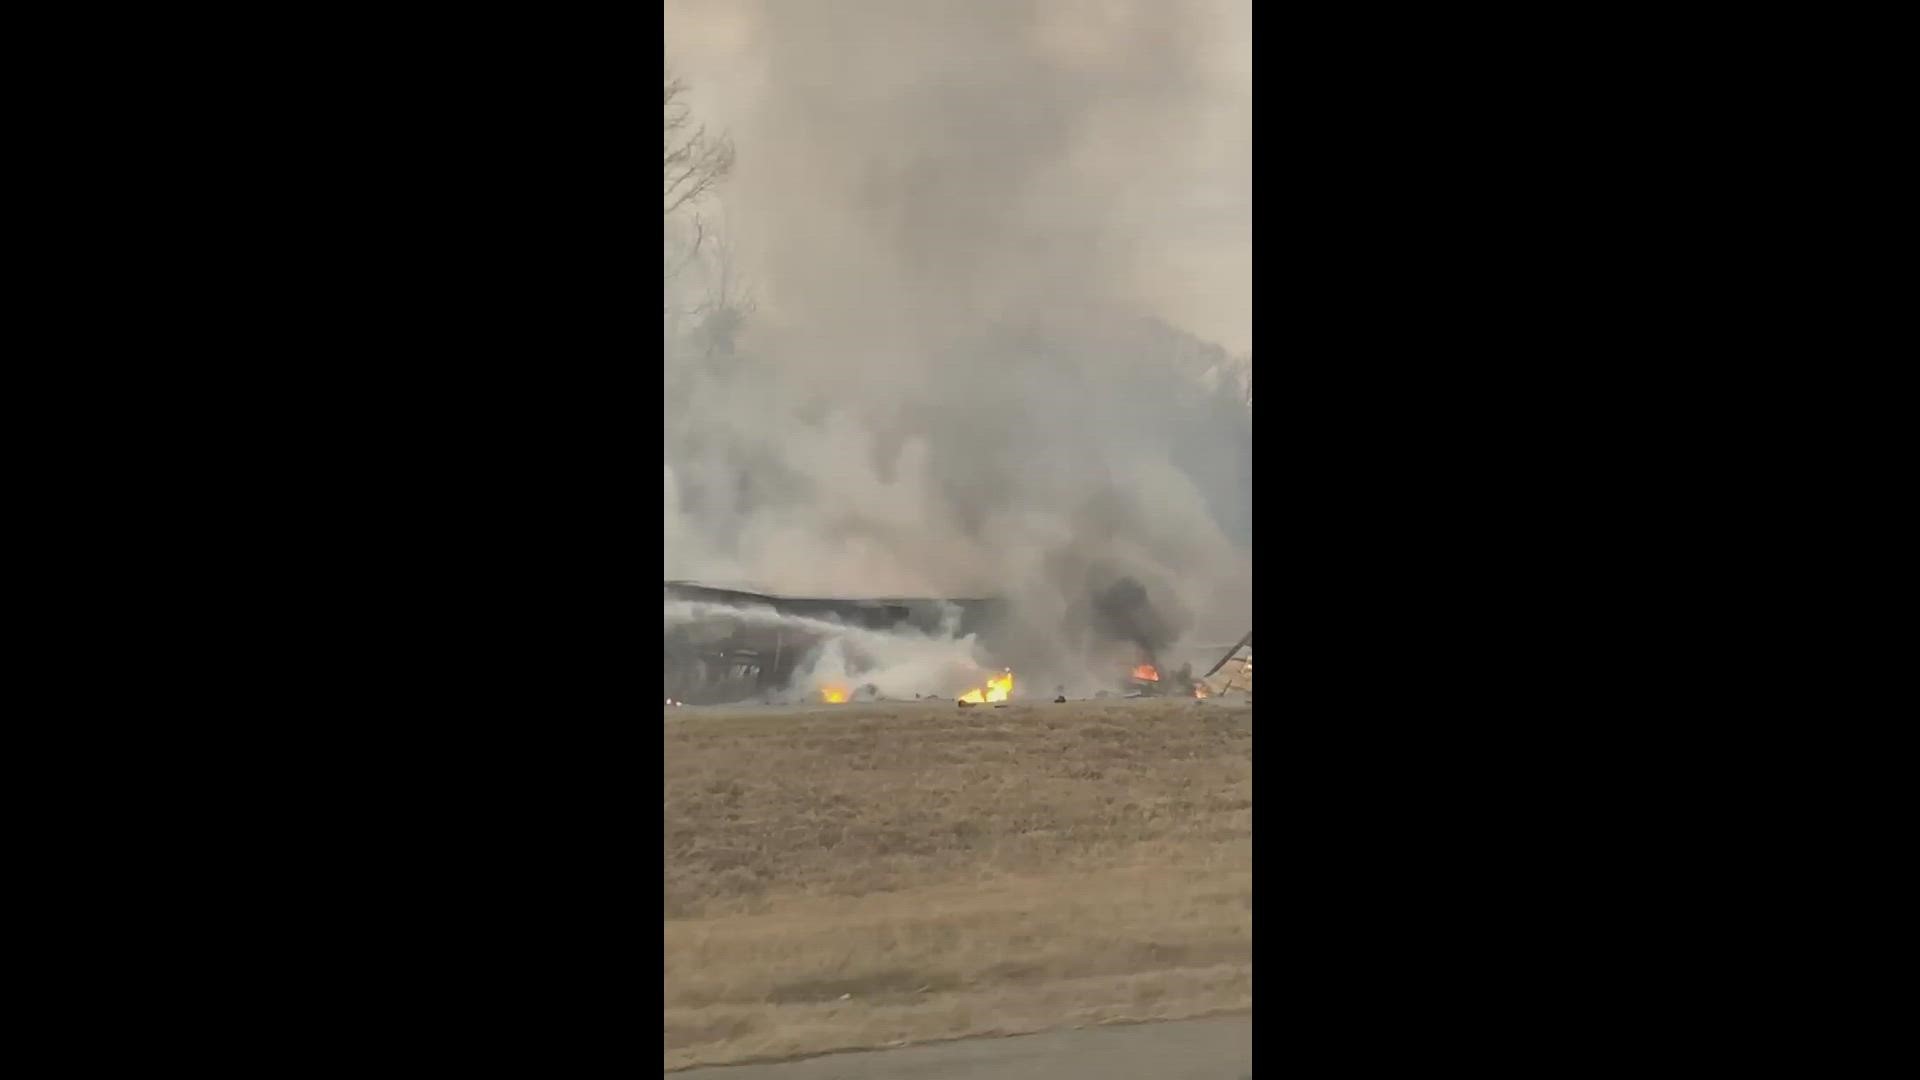 Fire crews worked to douse the flames after a plane crashed and caught fire on I-85 near the Davison County Airport.  Credit: Danny Kelleher